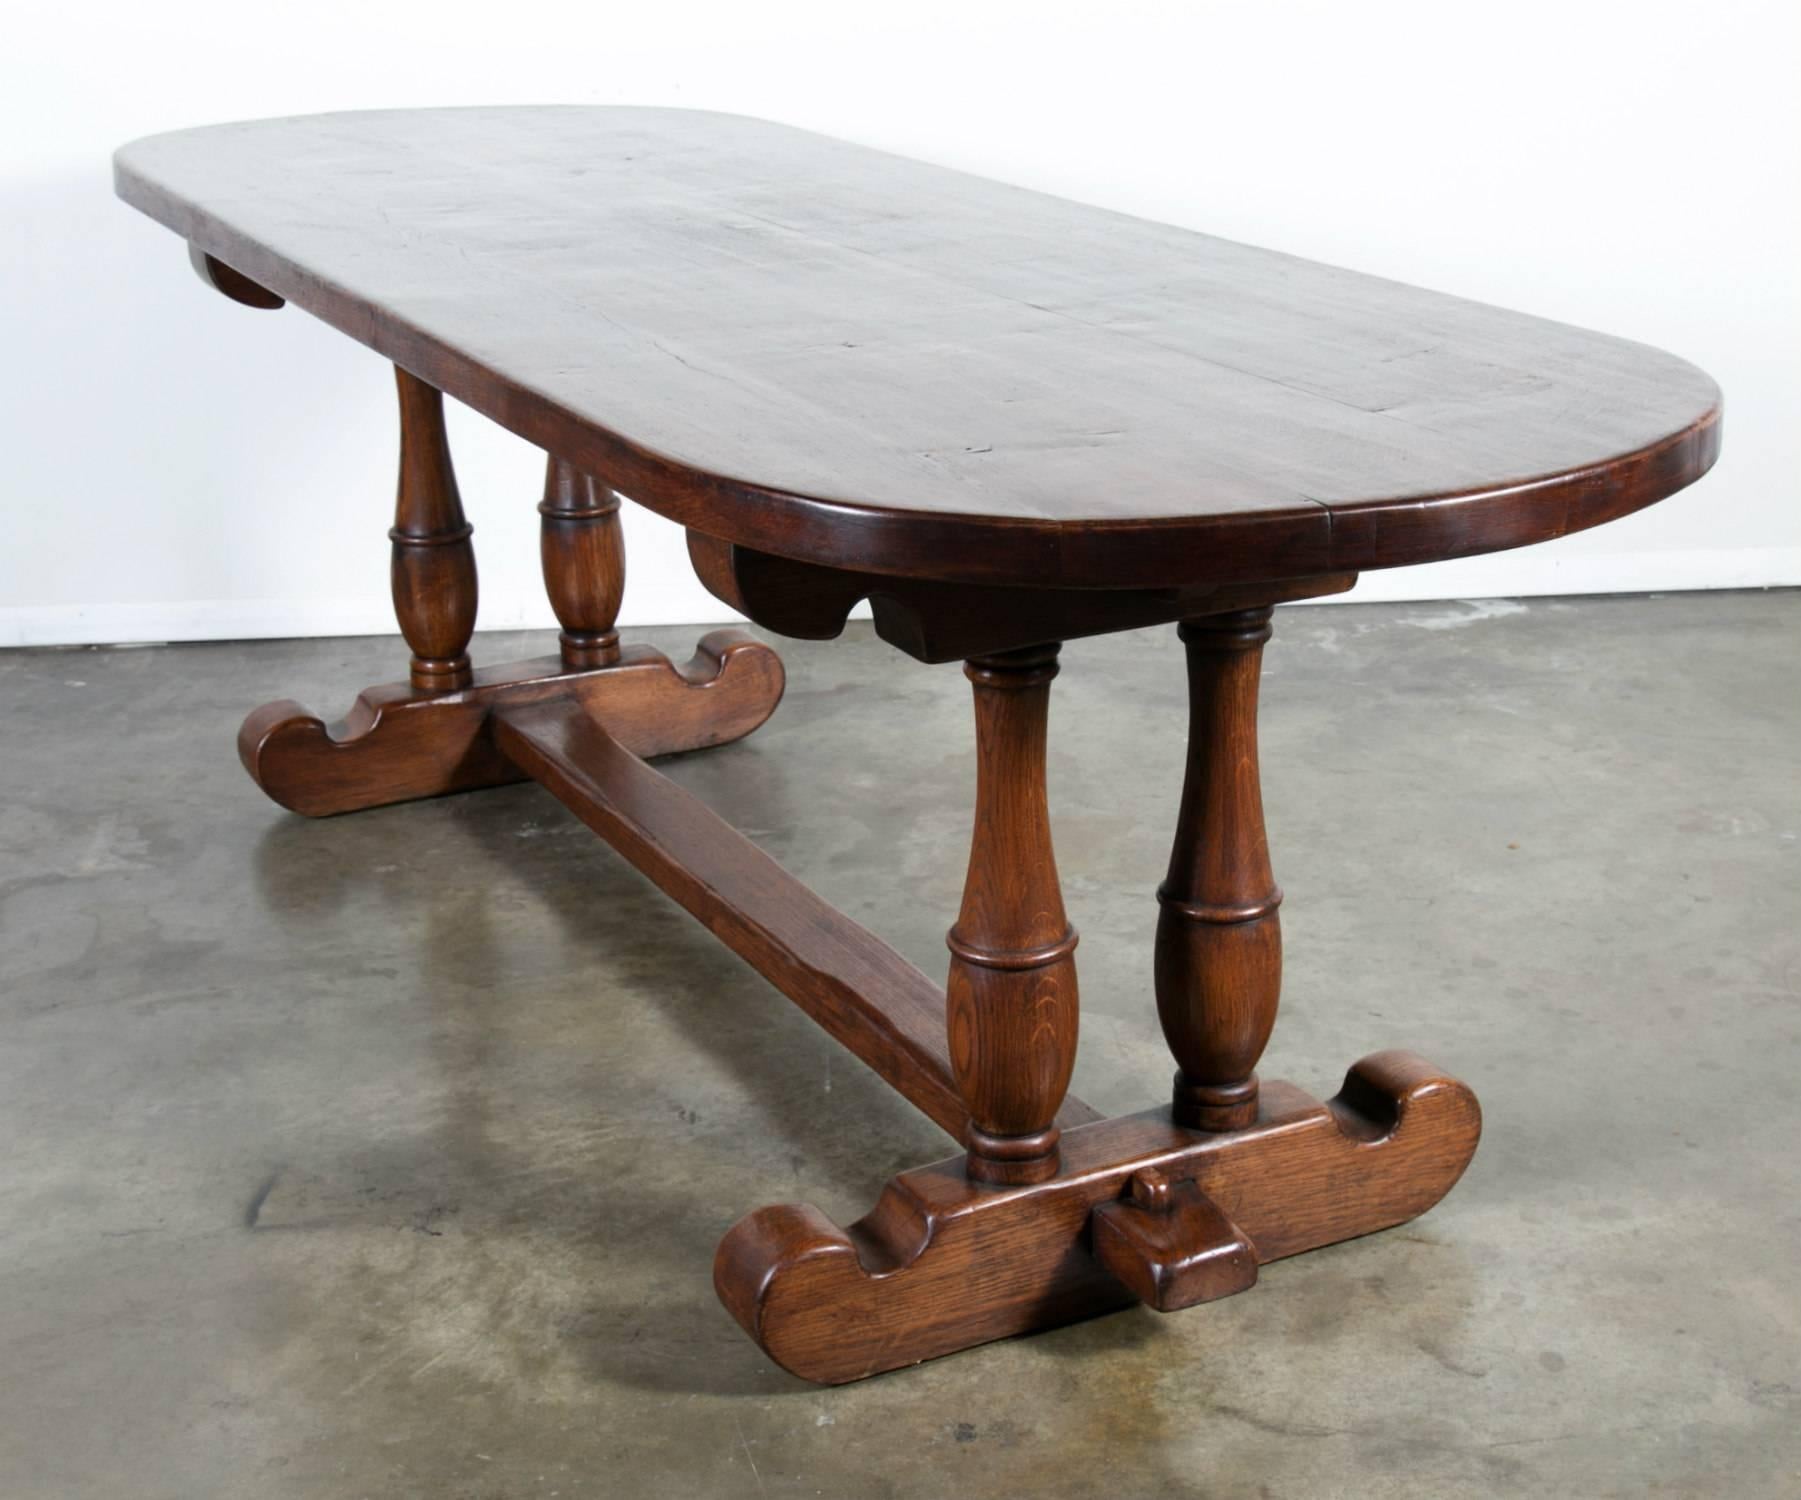 19th century French oak monastery trestle table with a 1.75